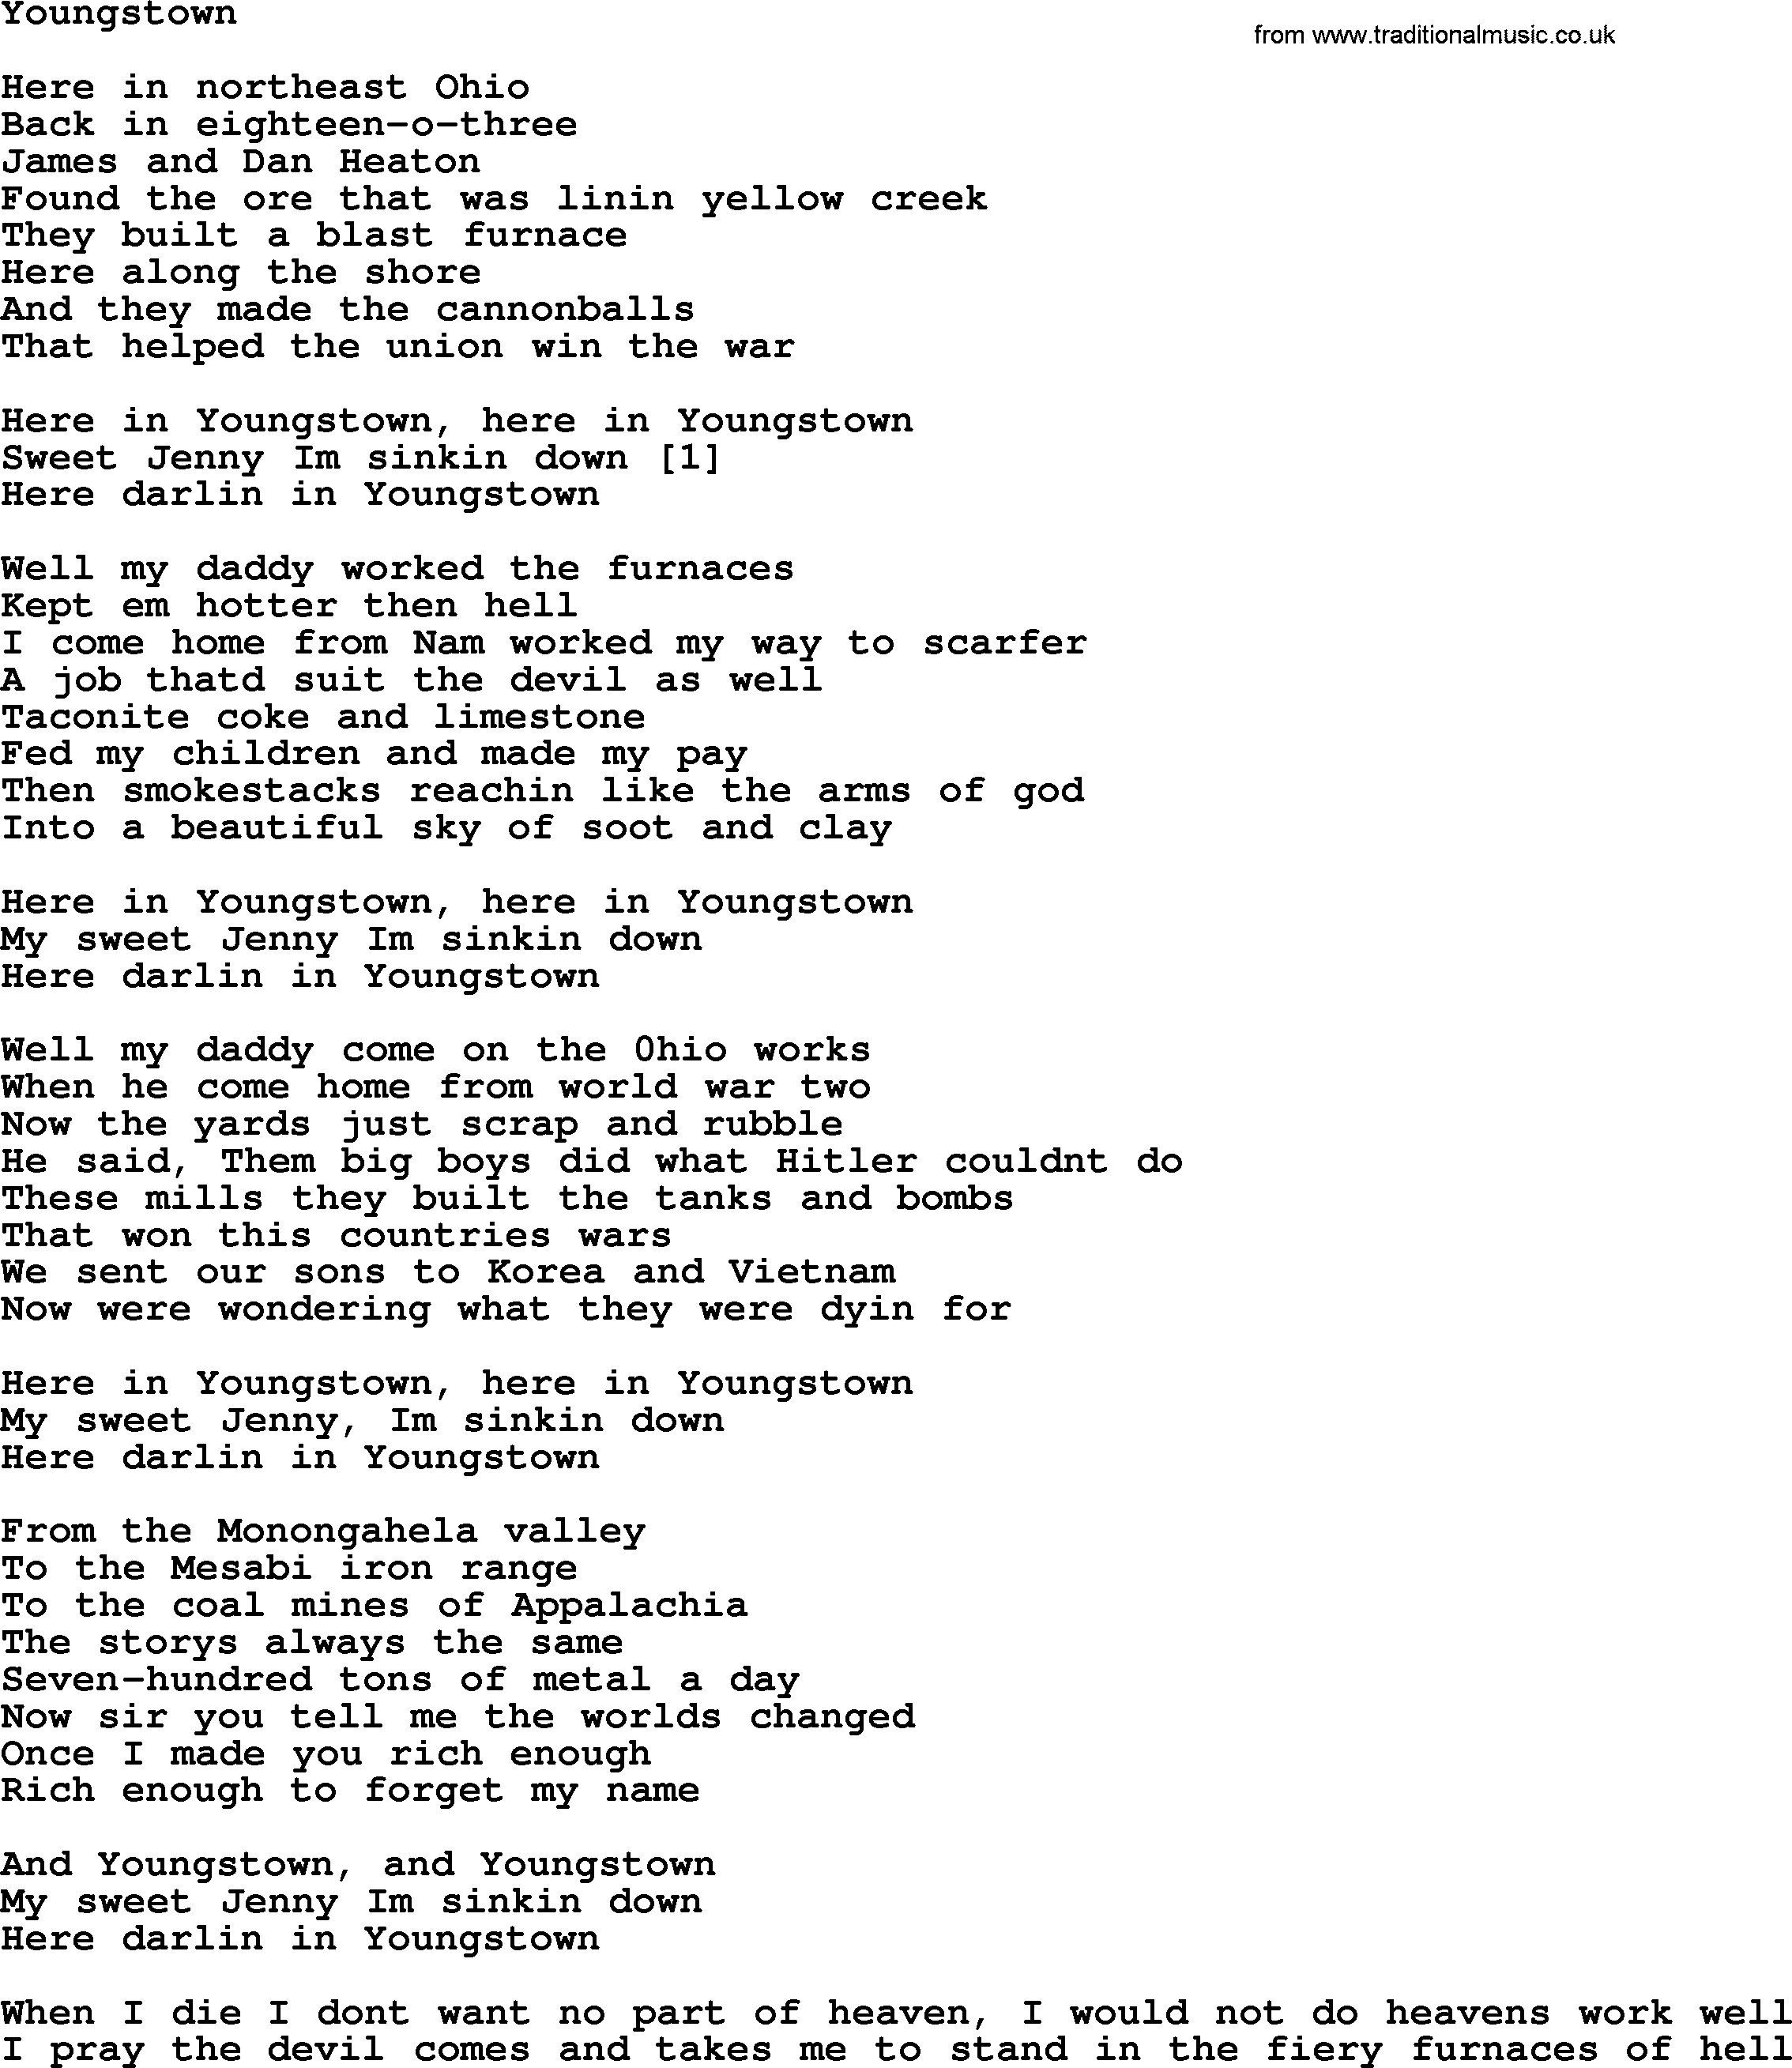 Bruce Springsteen song: Youngstown lyrics